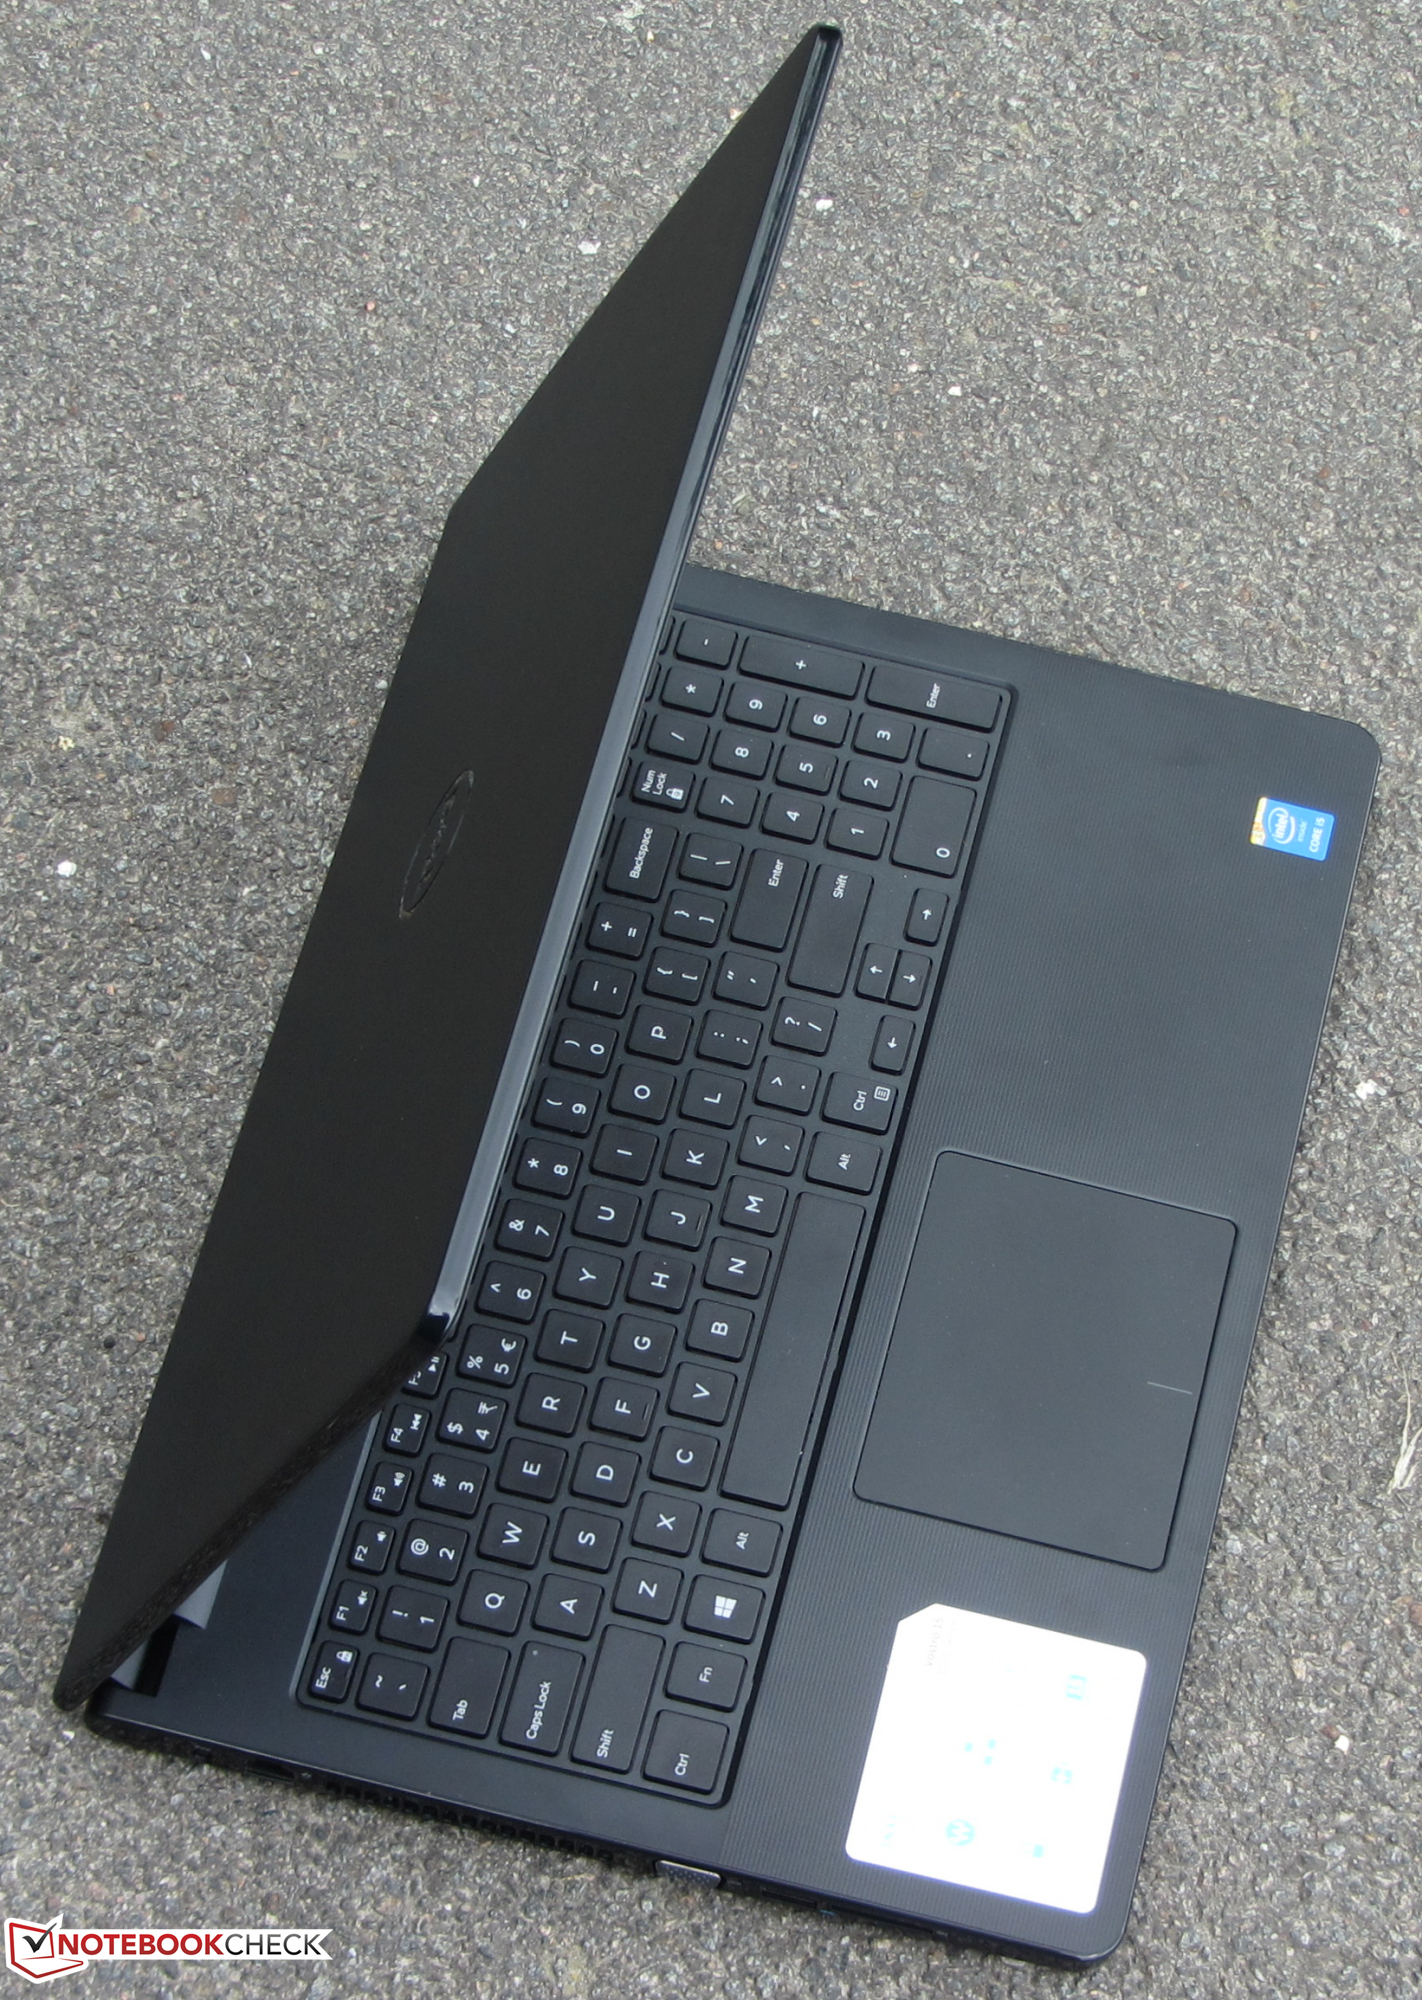 Dell Vostro 15 3558 Notebook Review - NotebookCheck.net Reviews